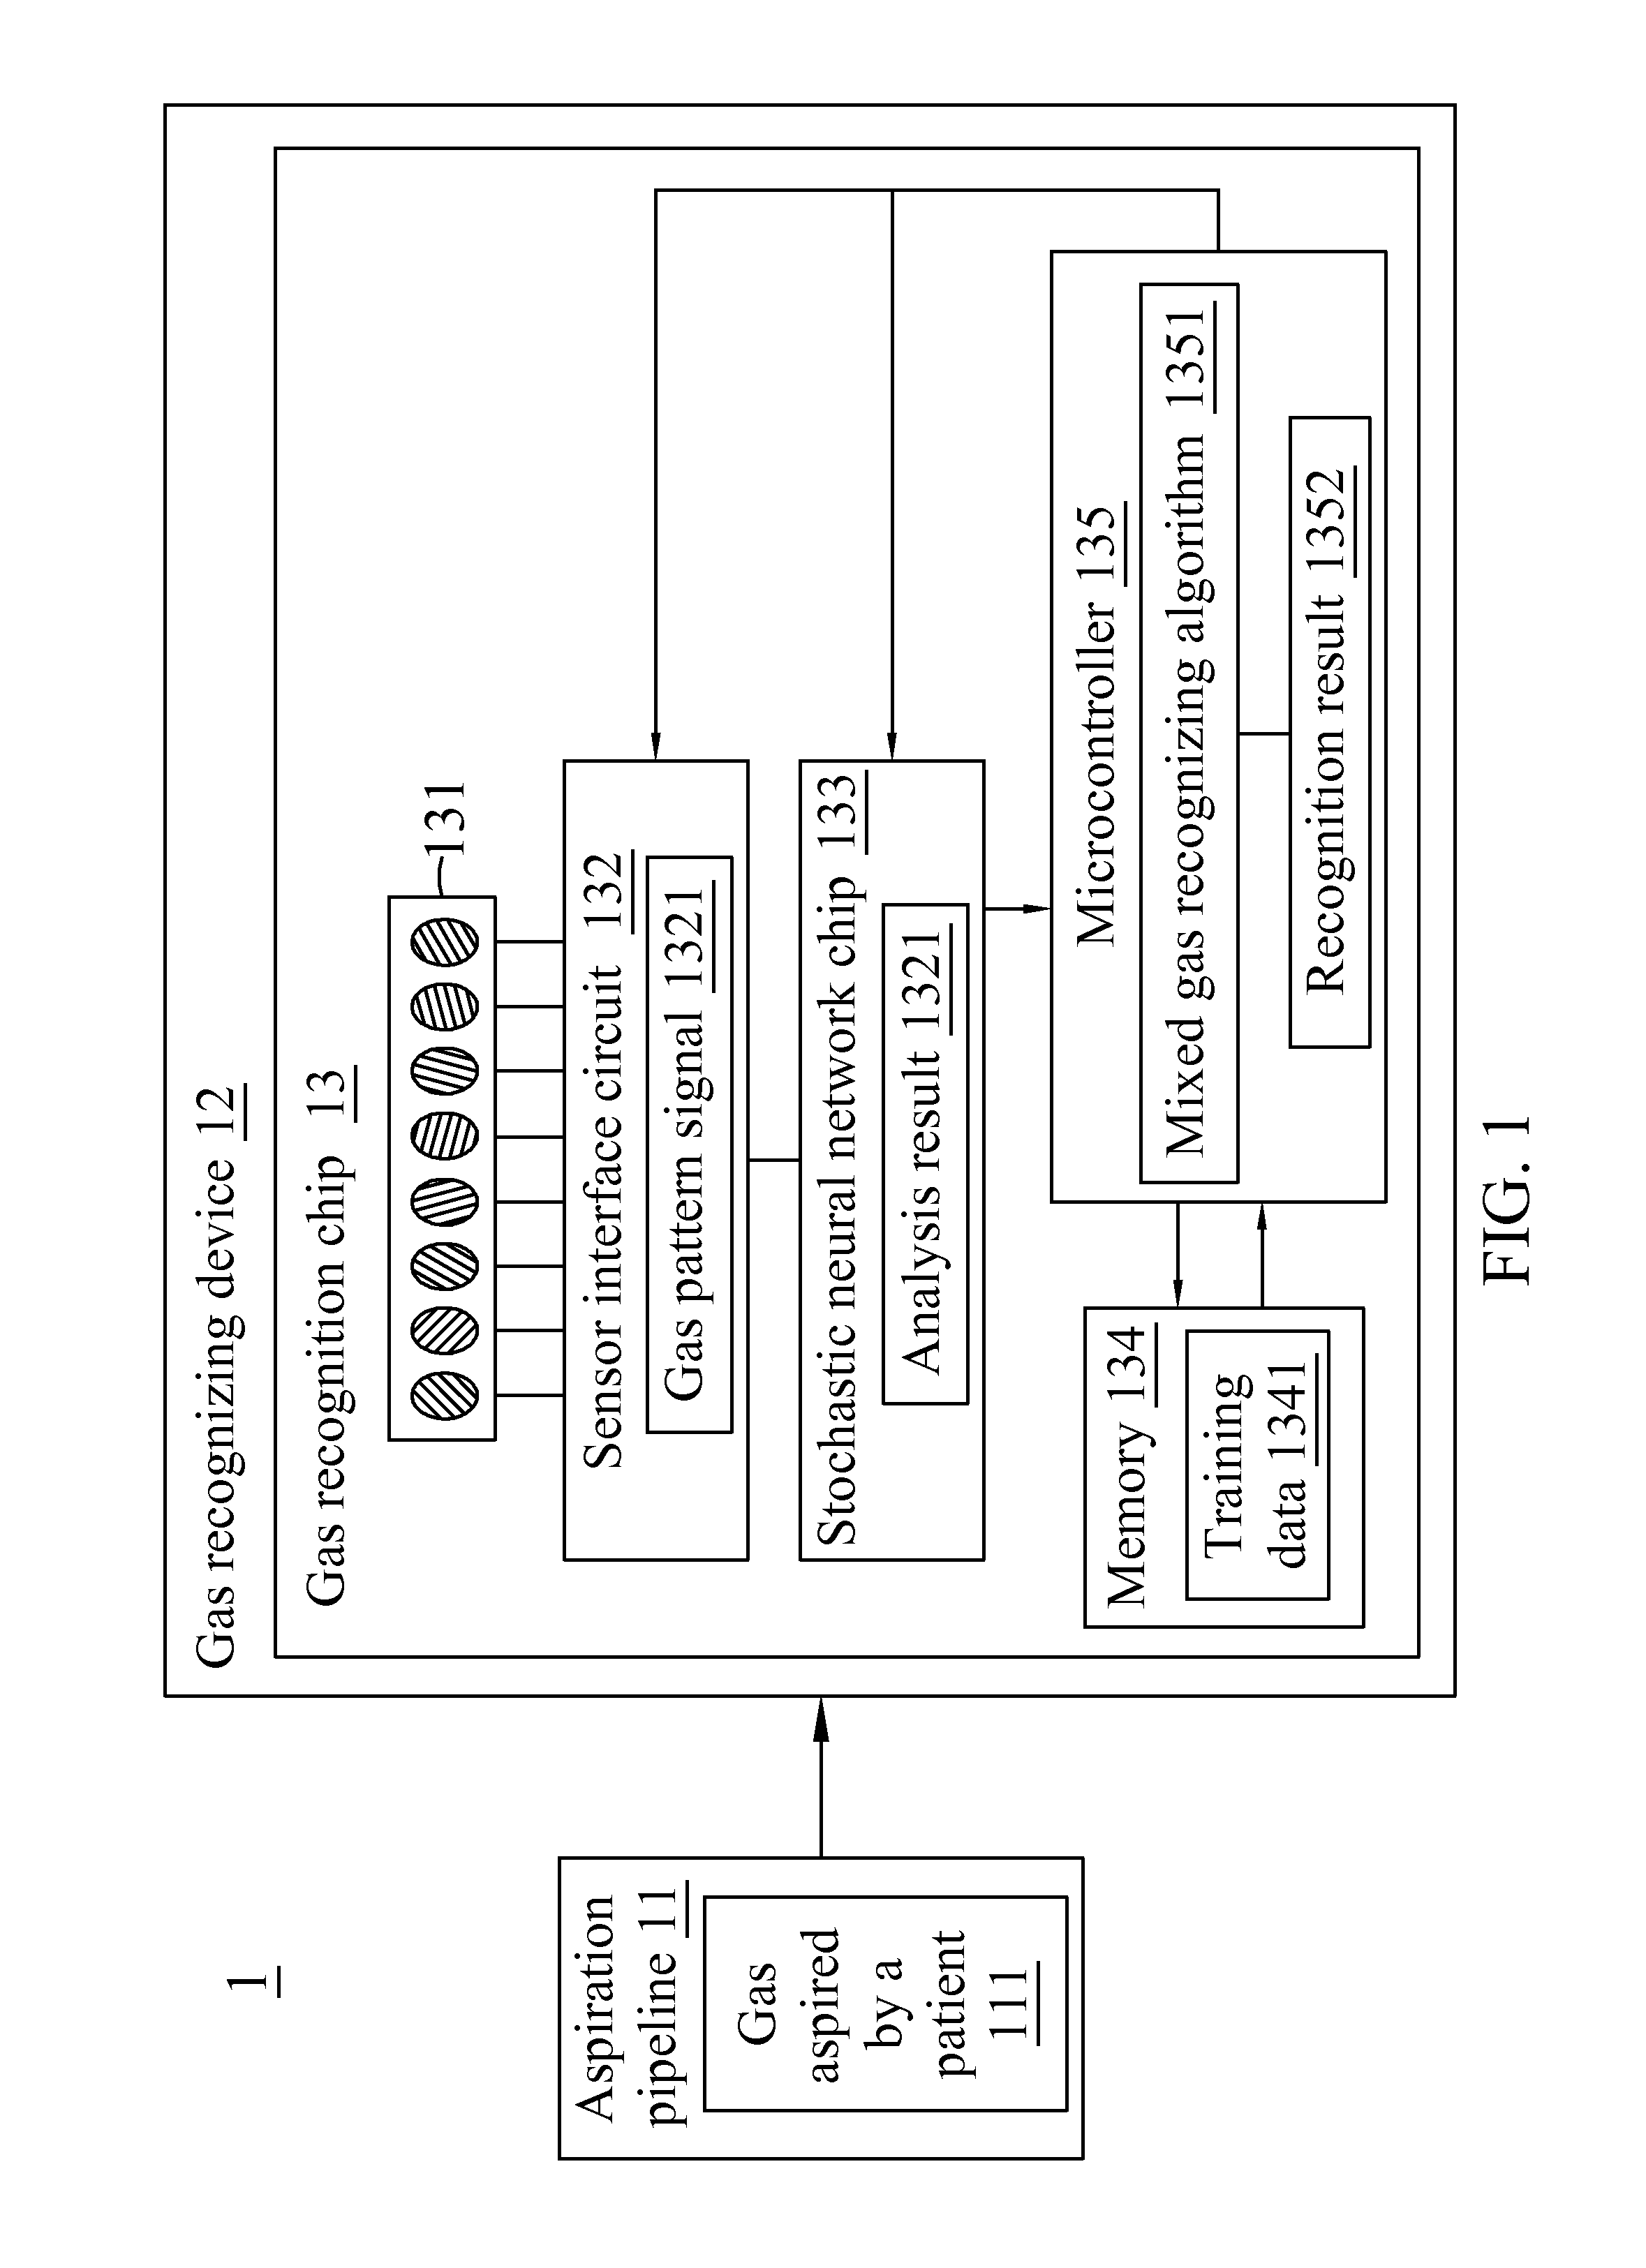 Medical ventilator capable of early detecting and recognizing types of pneumonia, gas recognition chip, and method for recognizing gas thereof